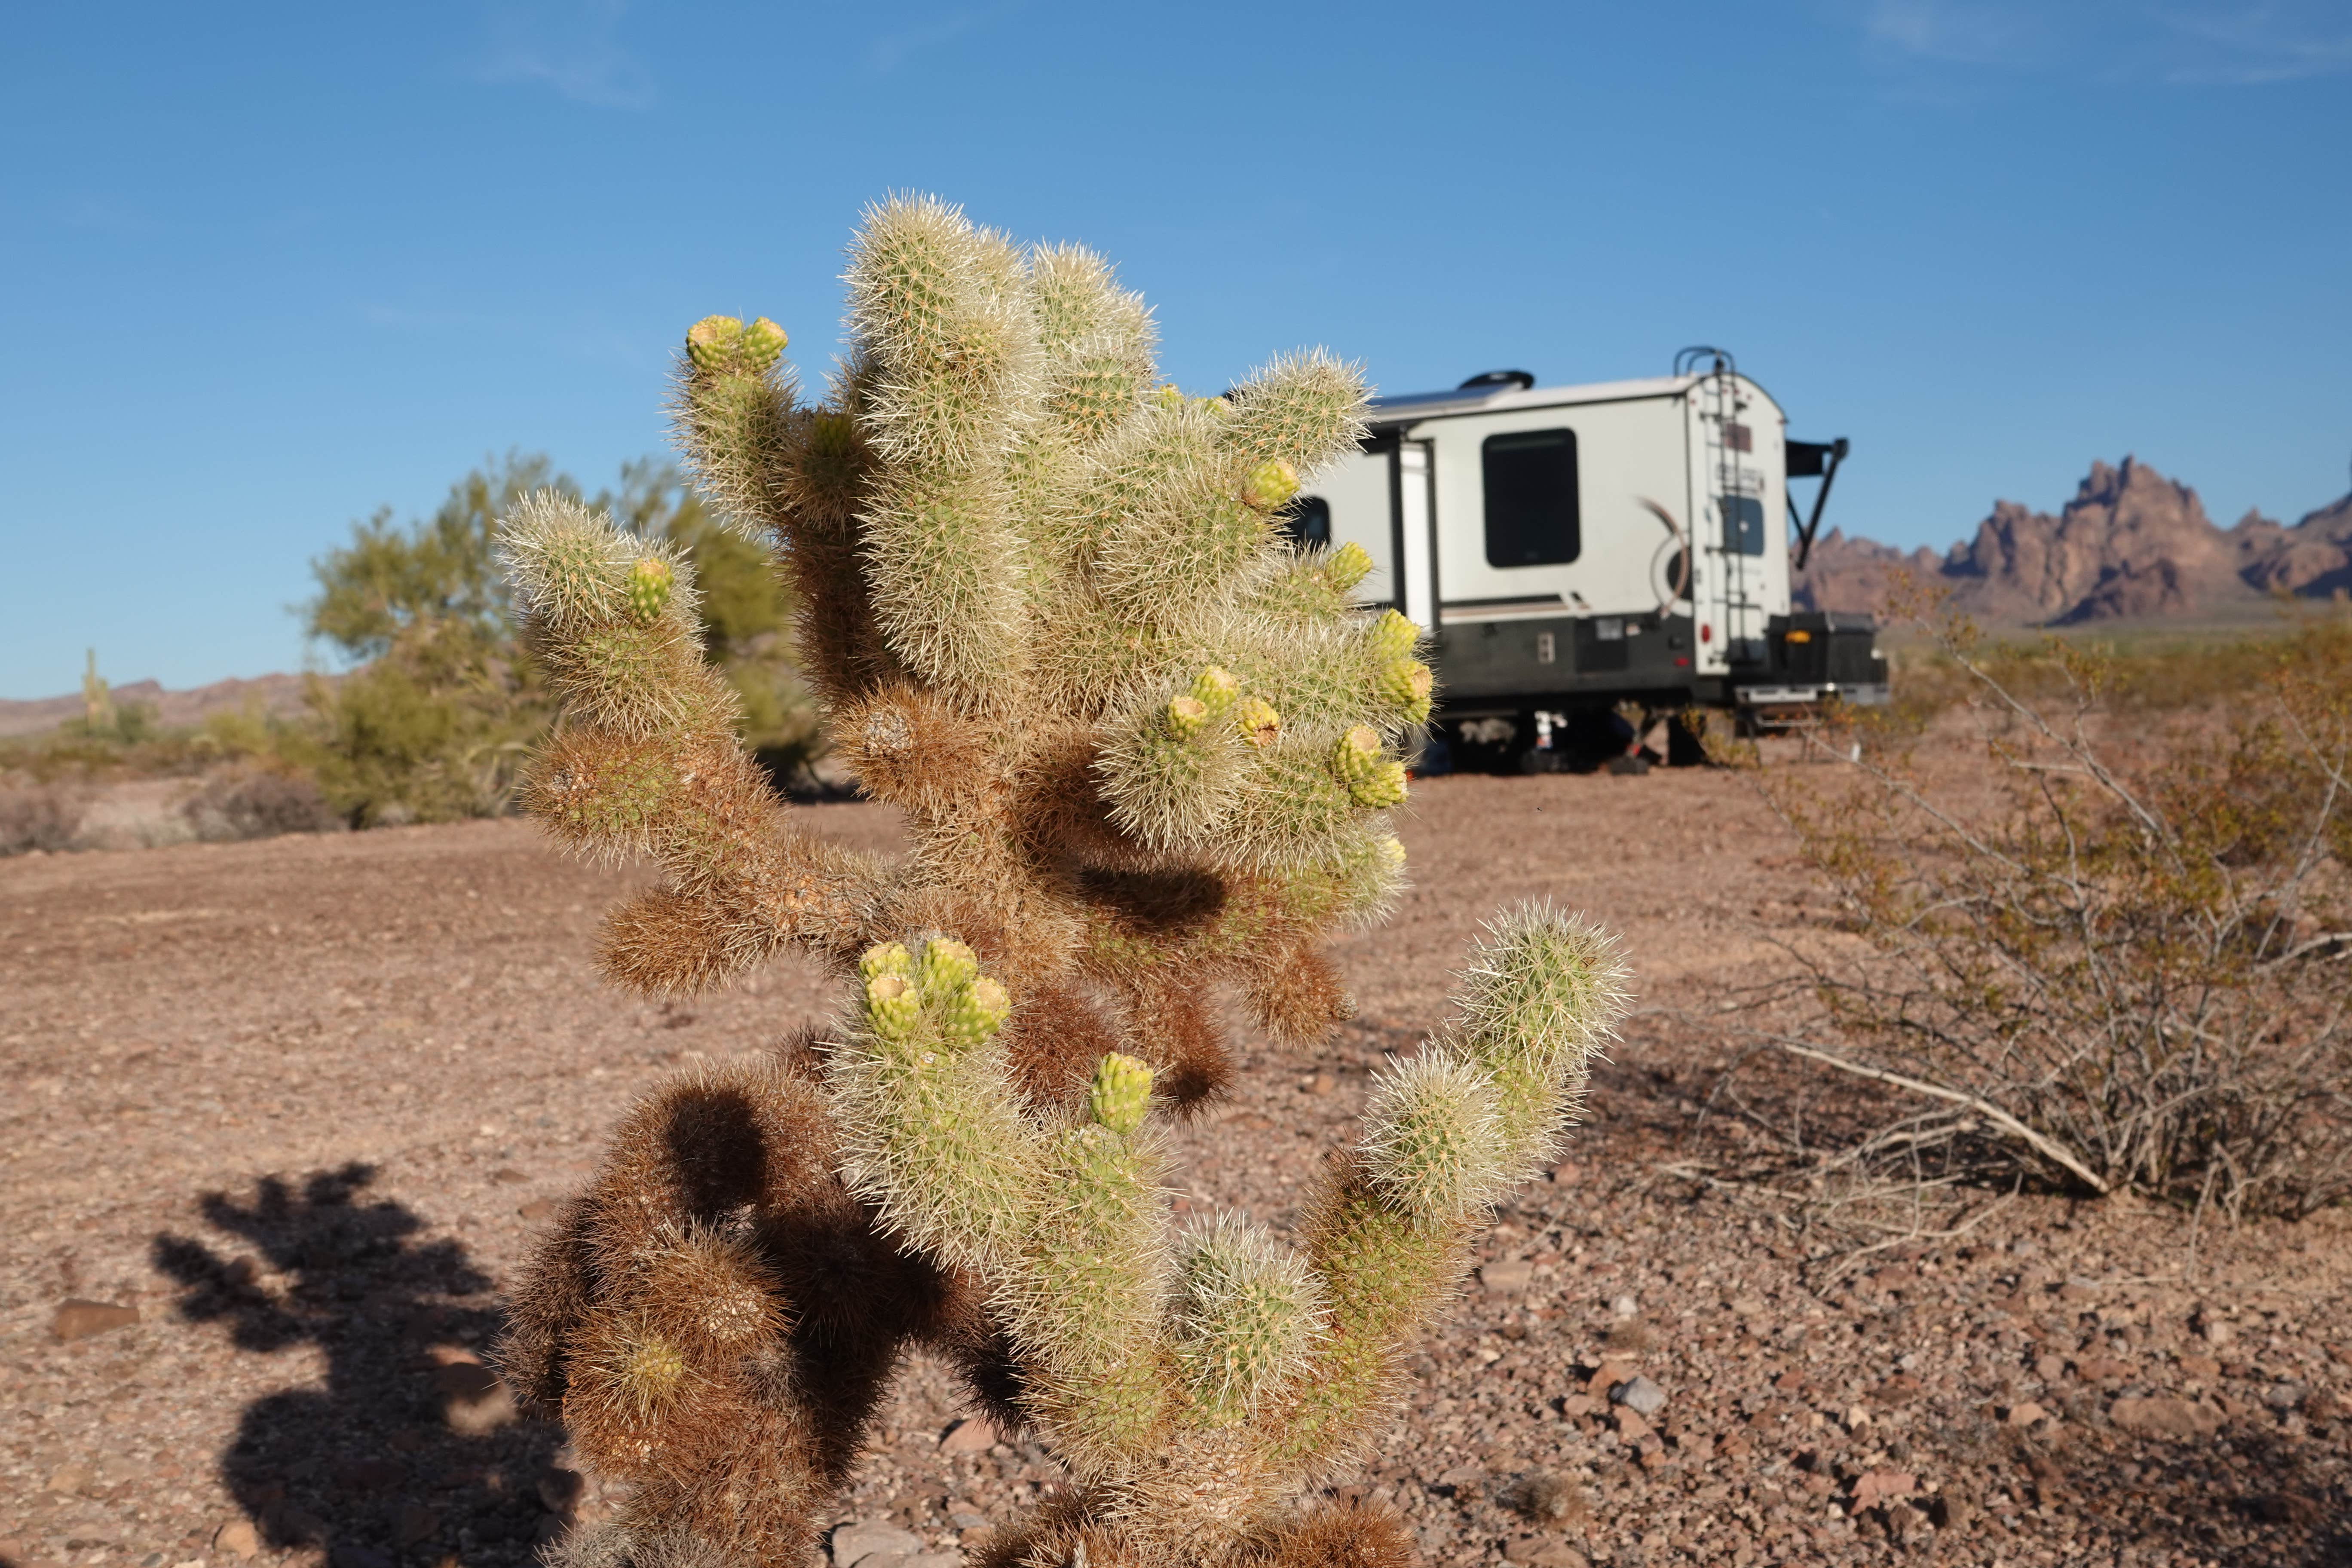 Camper submitted image from Kofa Queen Canyon - 3